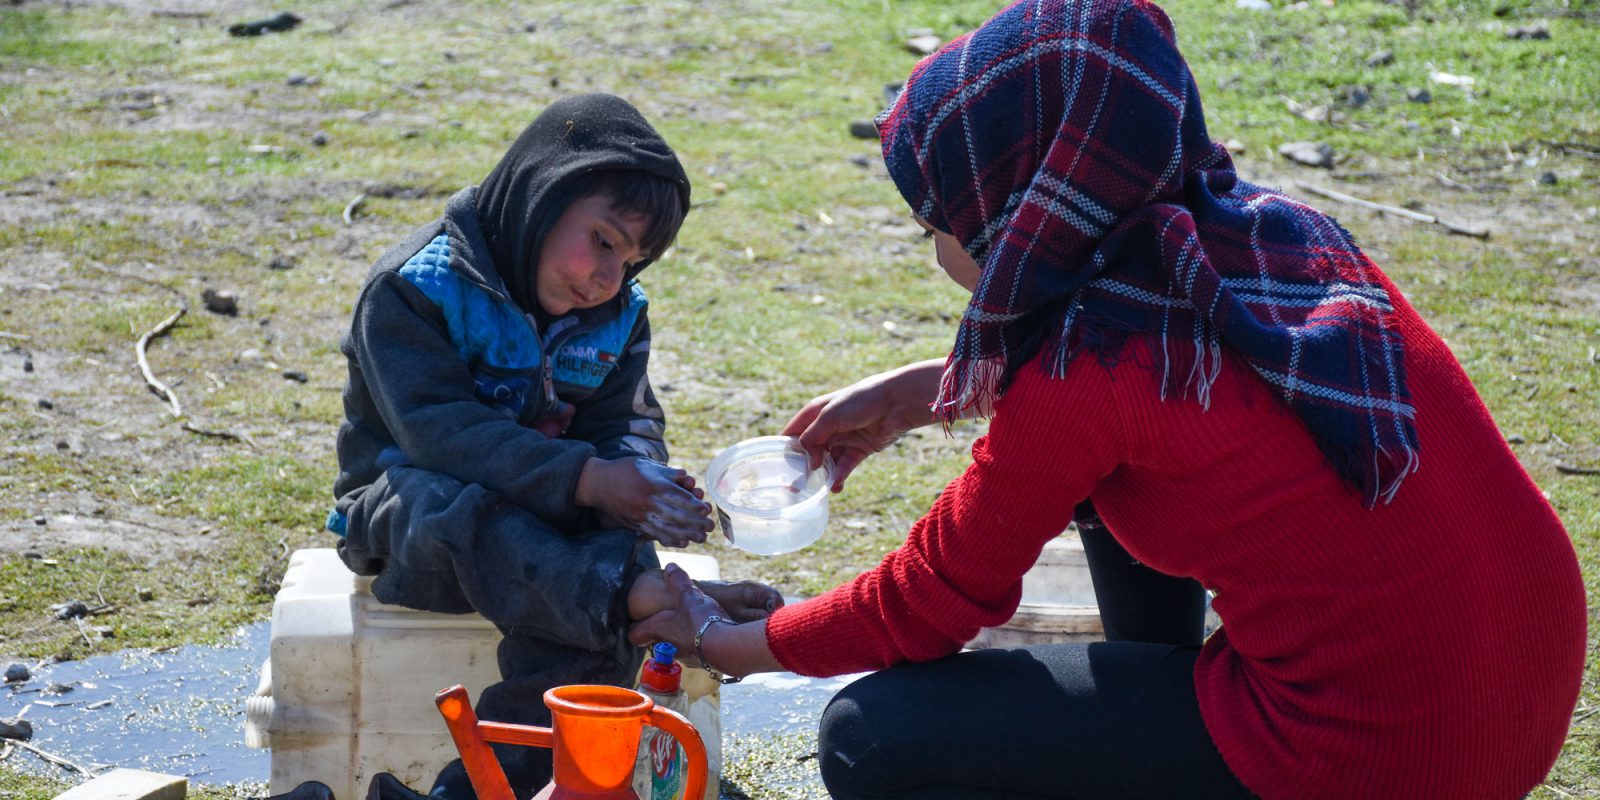 A woman washing the feet of a child in an IDP's settlement in Aleppo following the earthquake. Fr Thomas H. Smolich SJ, in his Easter message, reminds us that simple gestures of welcoming, listening and washing feet make all the difference.